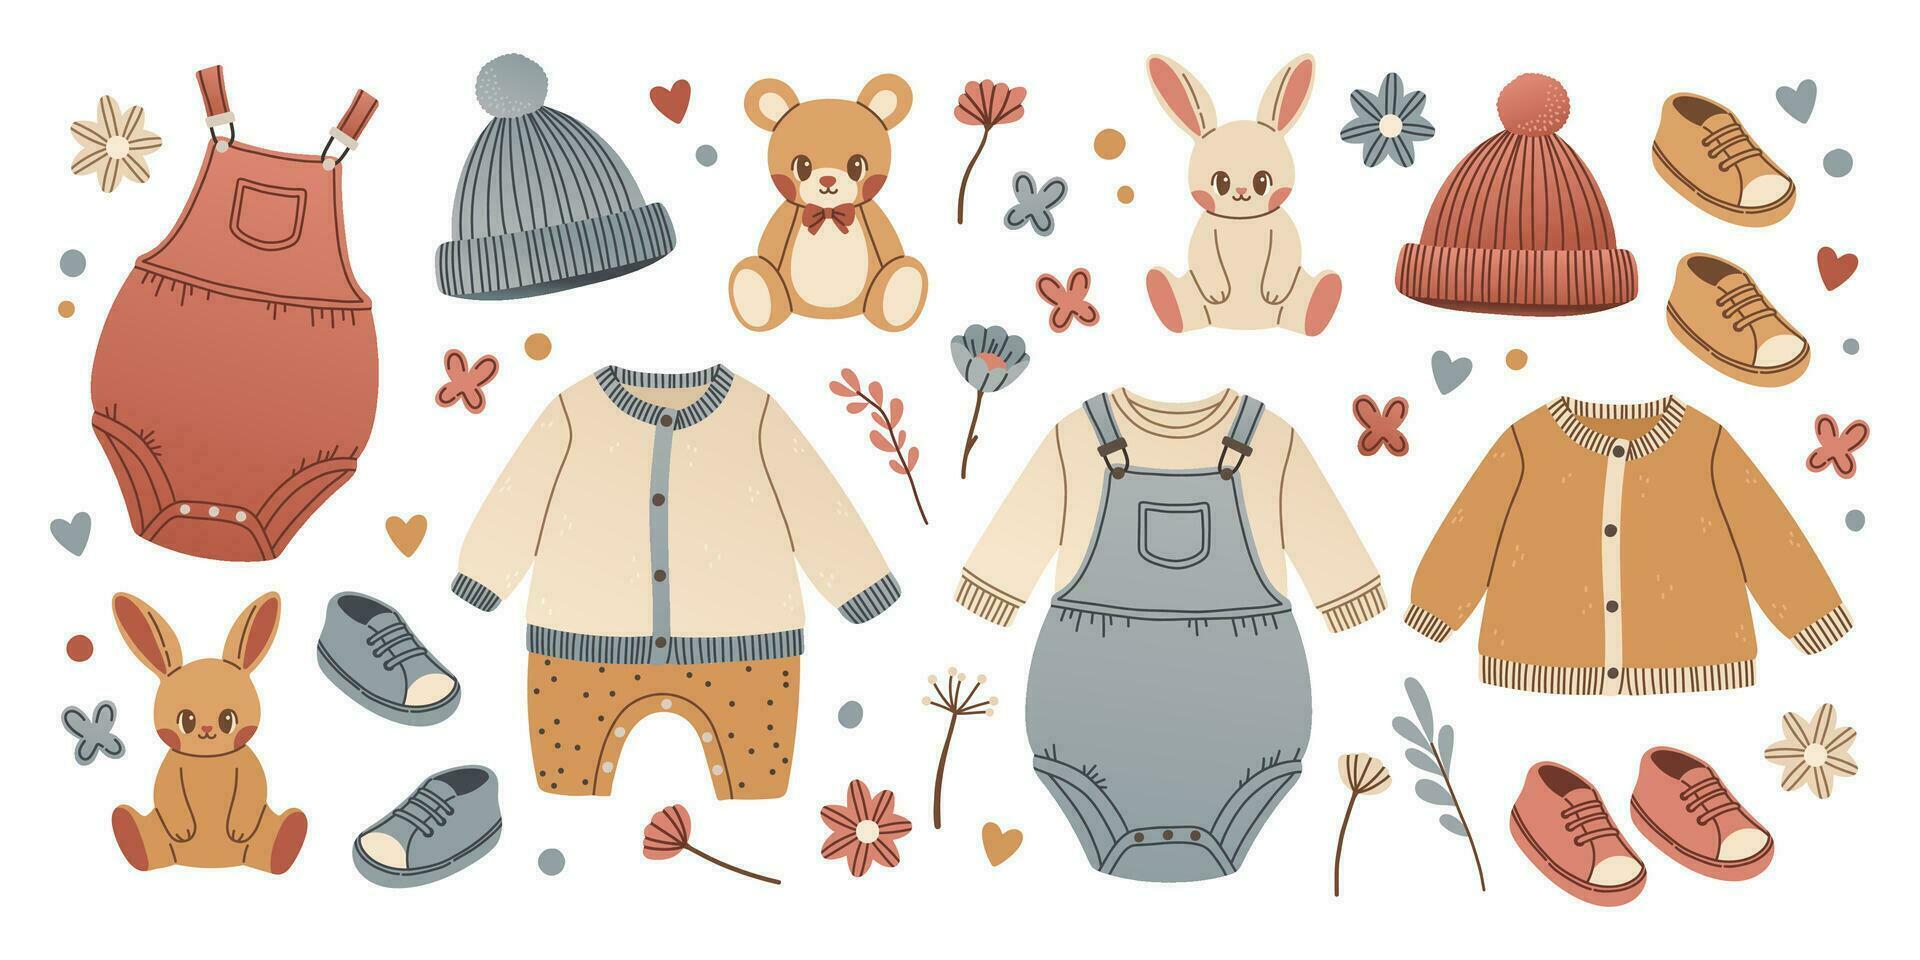 Baby toys and clothes set in hand drawn style. Bunny and teddy bear for babyshower. Singlet, apron, sweater, bodysuit for infant boy or girl. Calm colors. Vector illustration